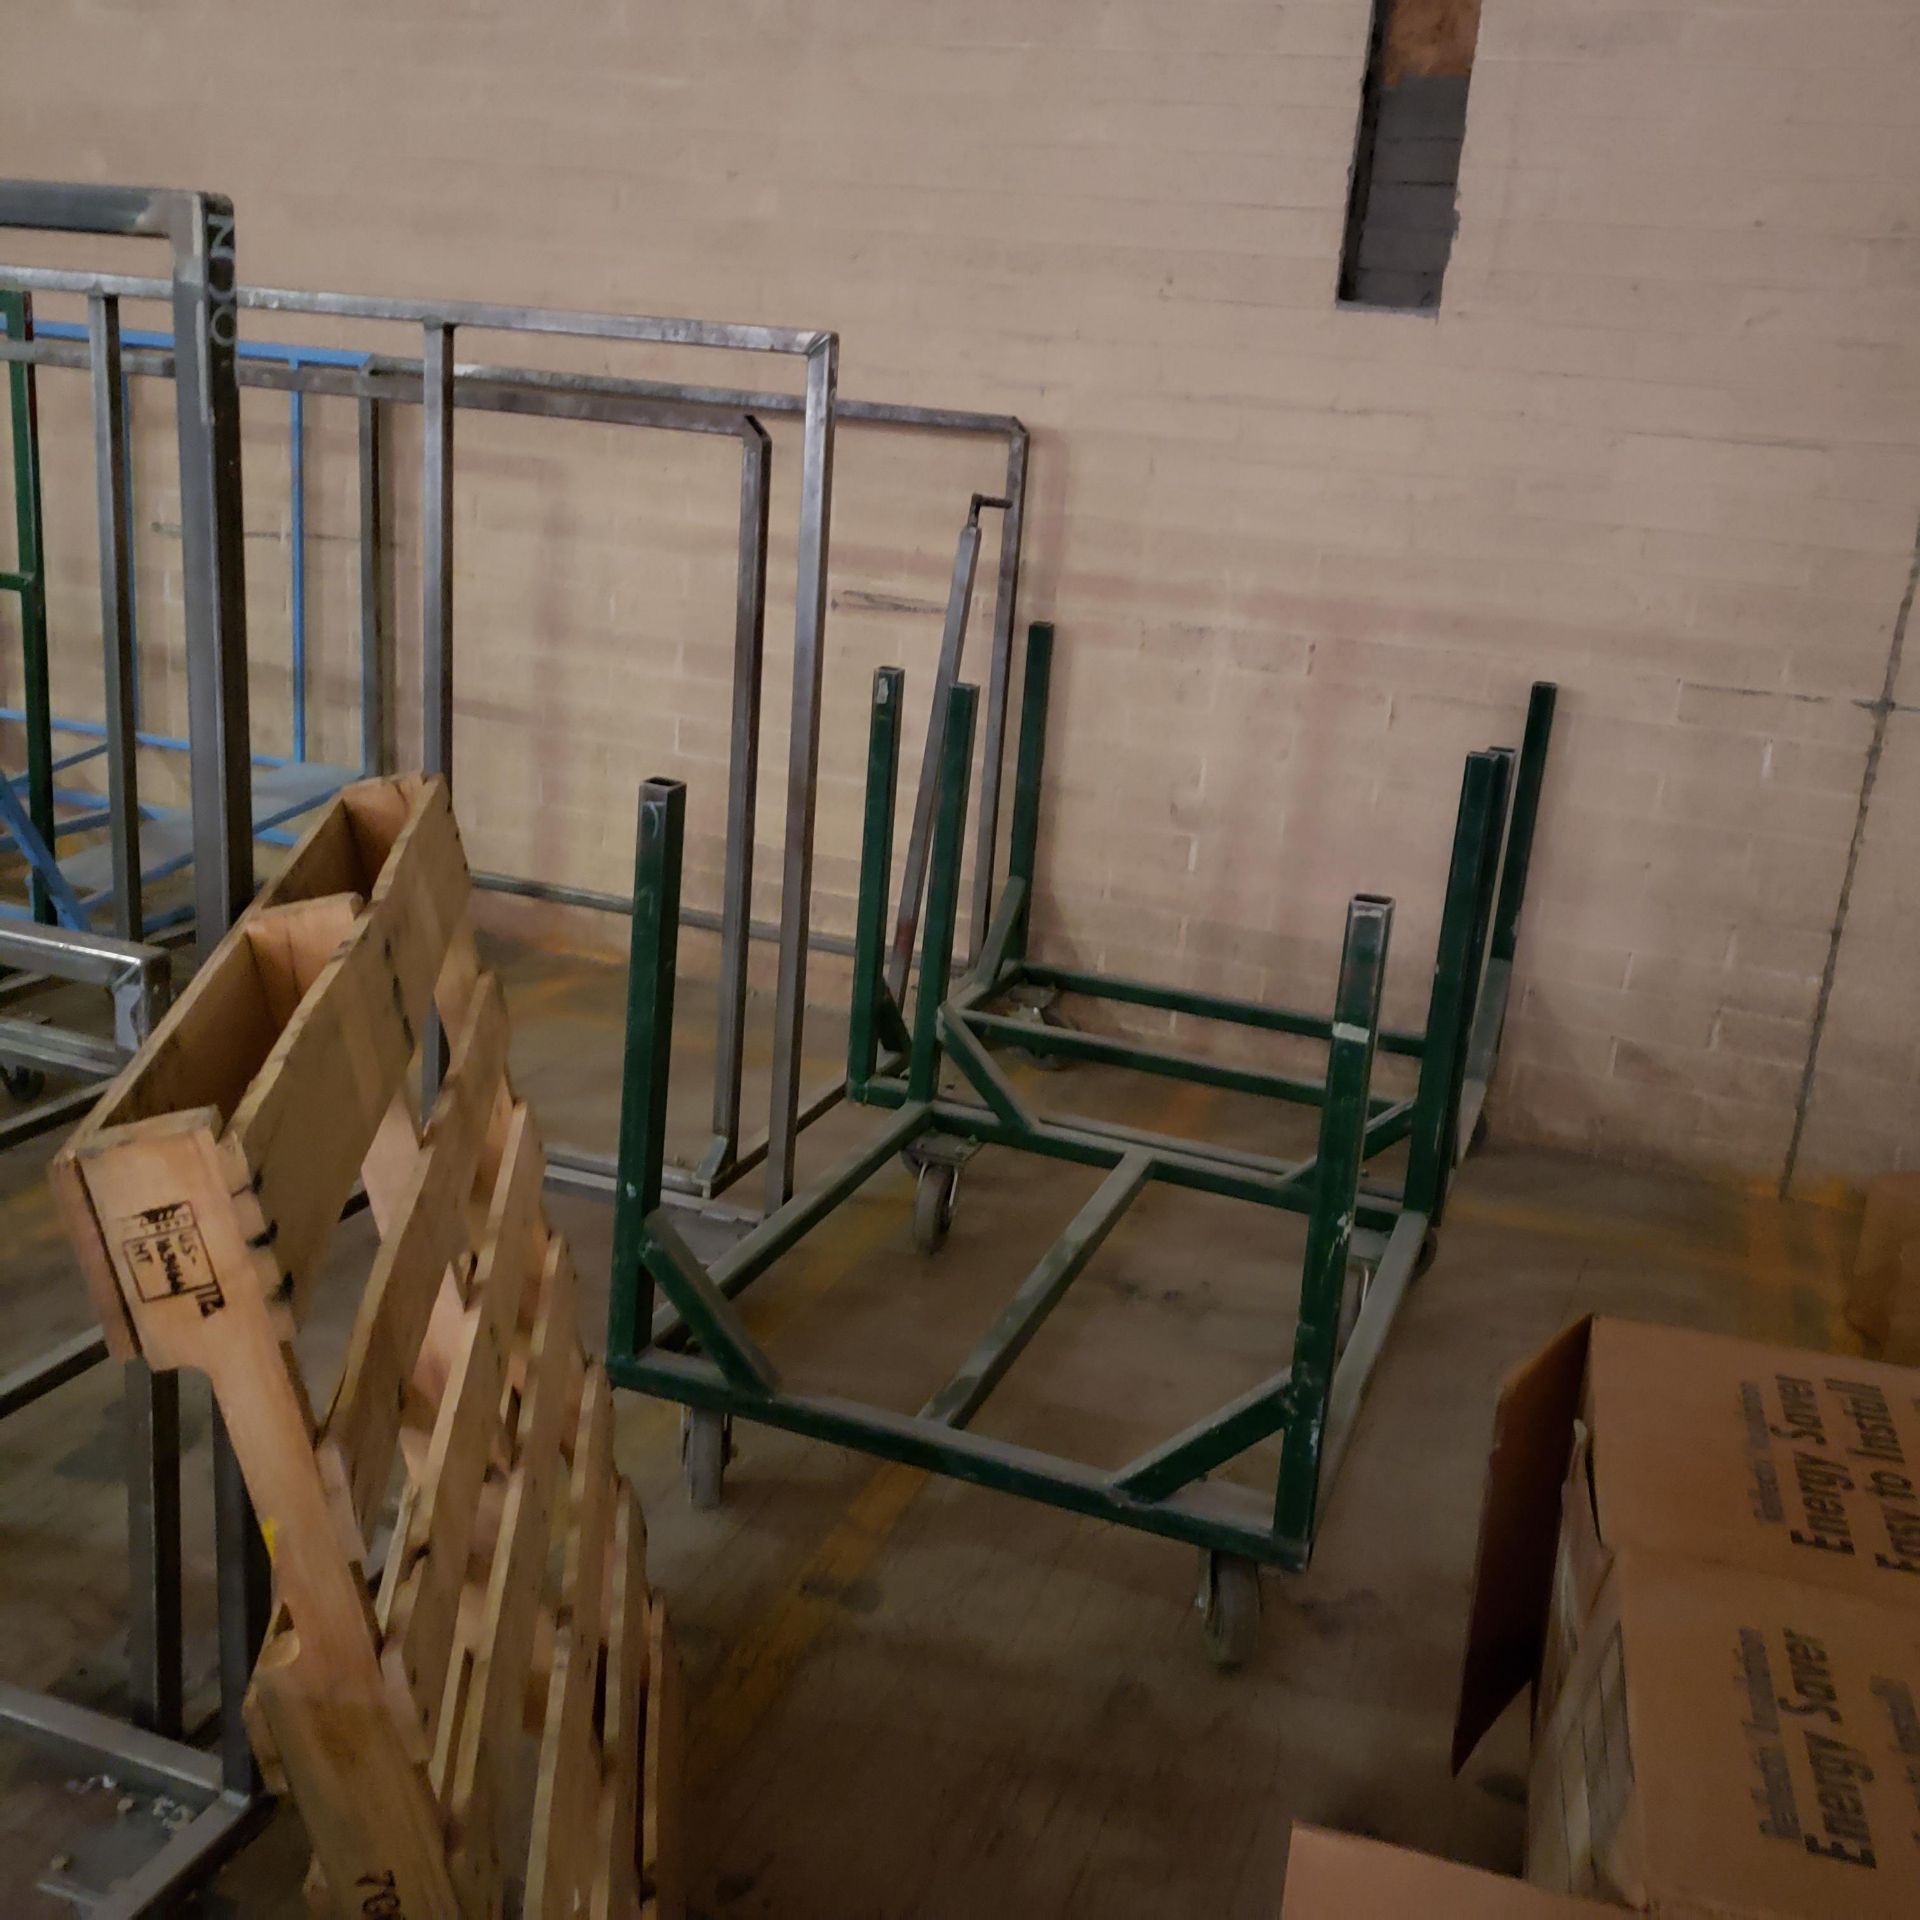 CORE CARTS, ALL WITH CASTERS, DIFFERENT SIZES 34 TOTAL CARTS (WAREHOUSE STORAGE0 - Image 7 of 7